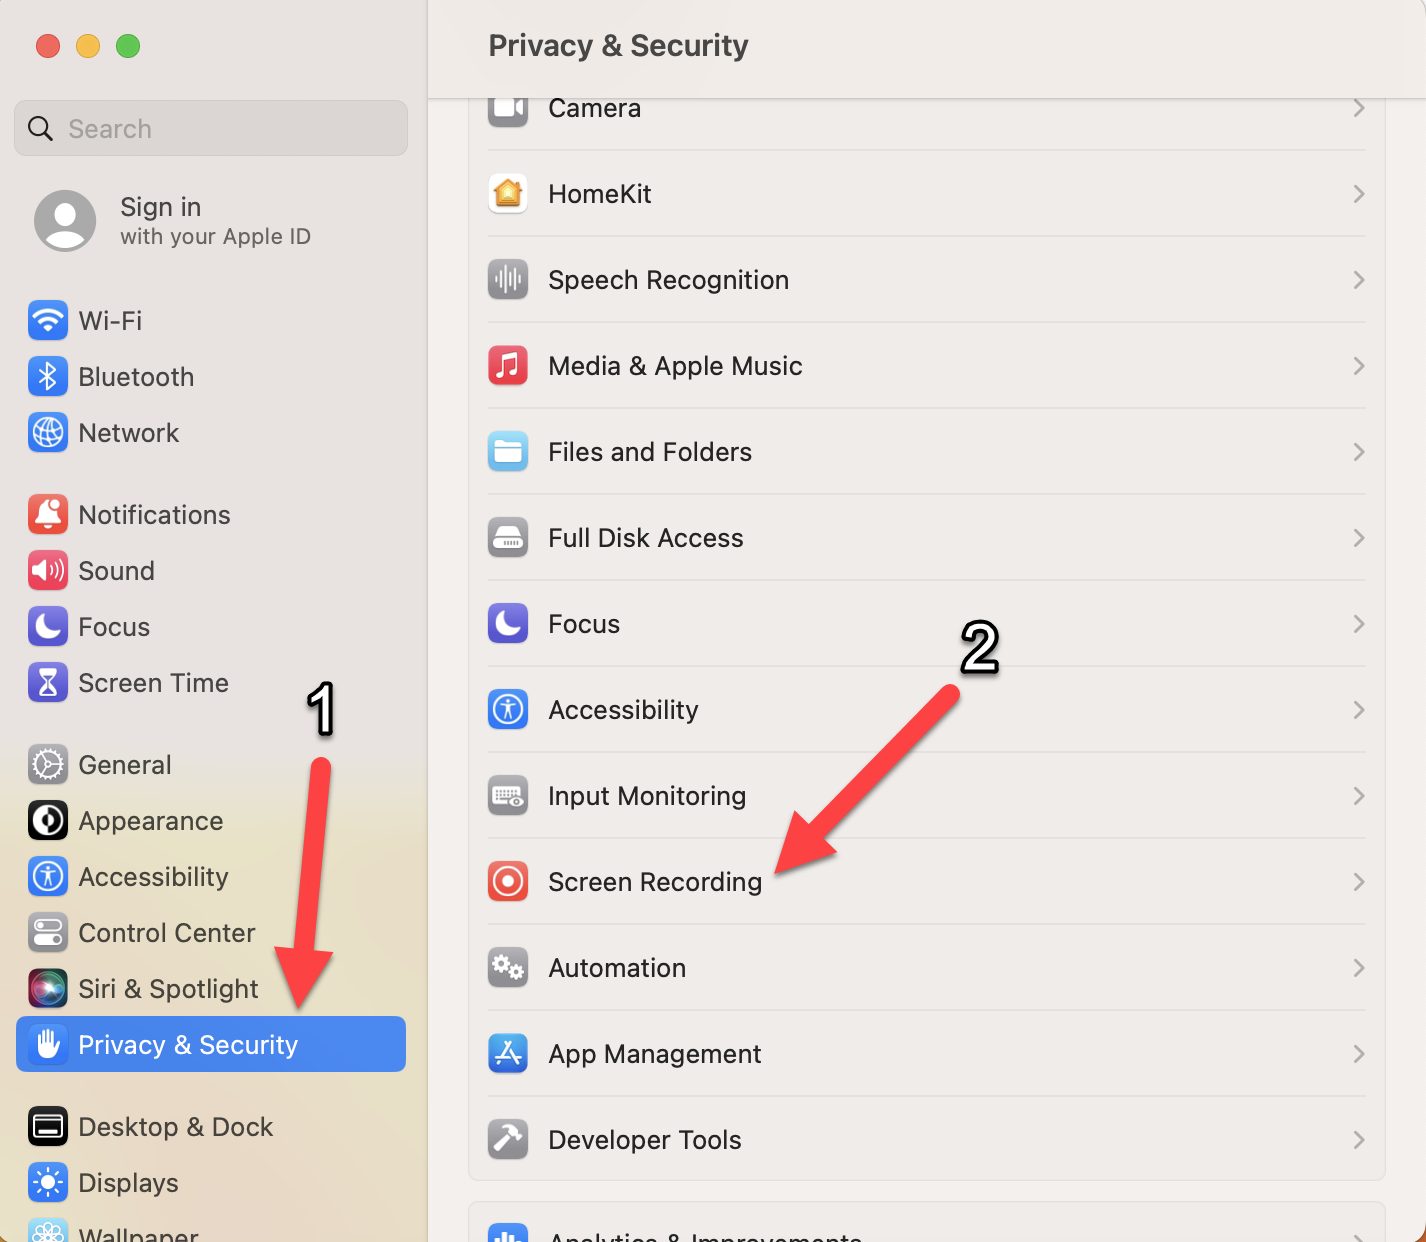 Mac privacy and security settings with the screen recording section highlighted